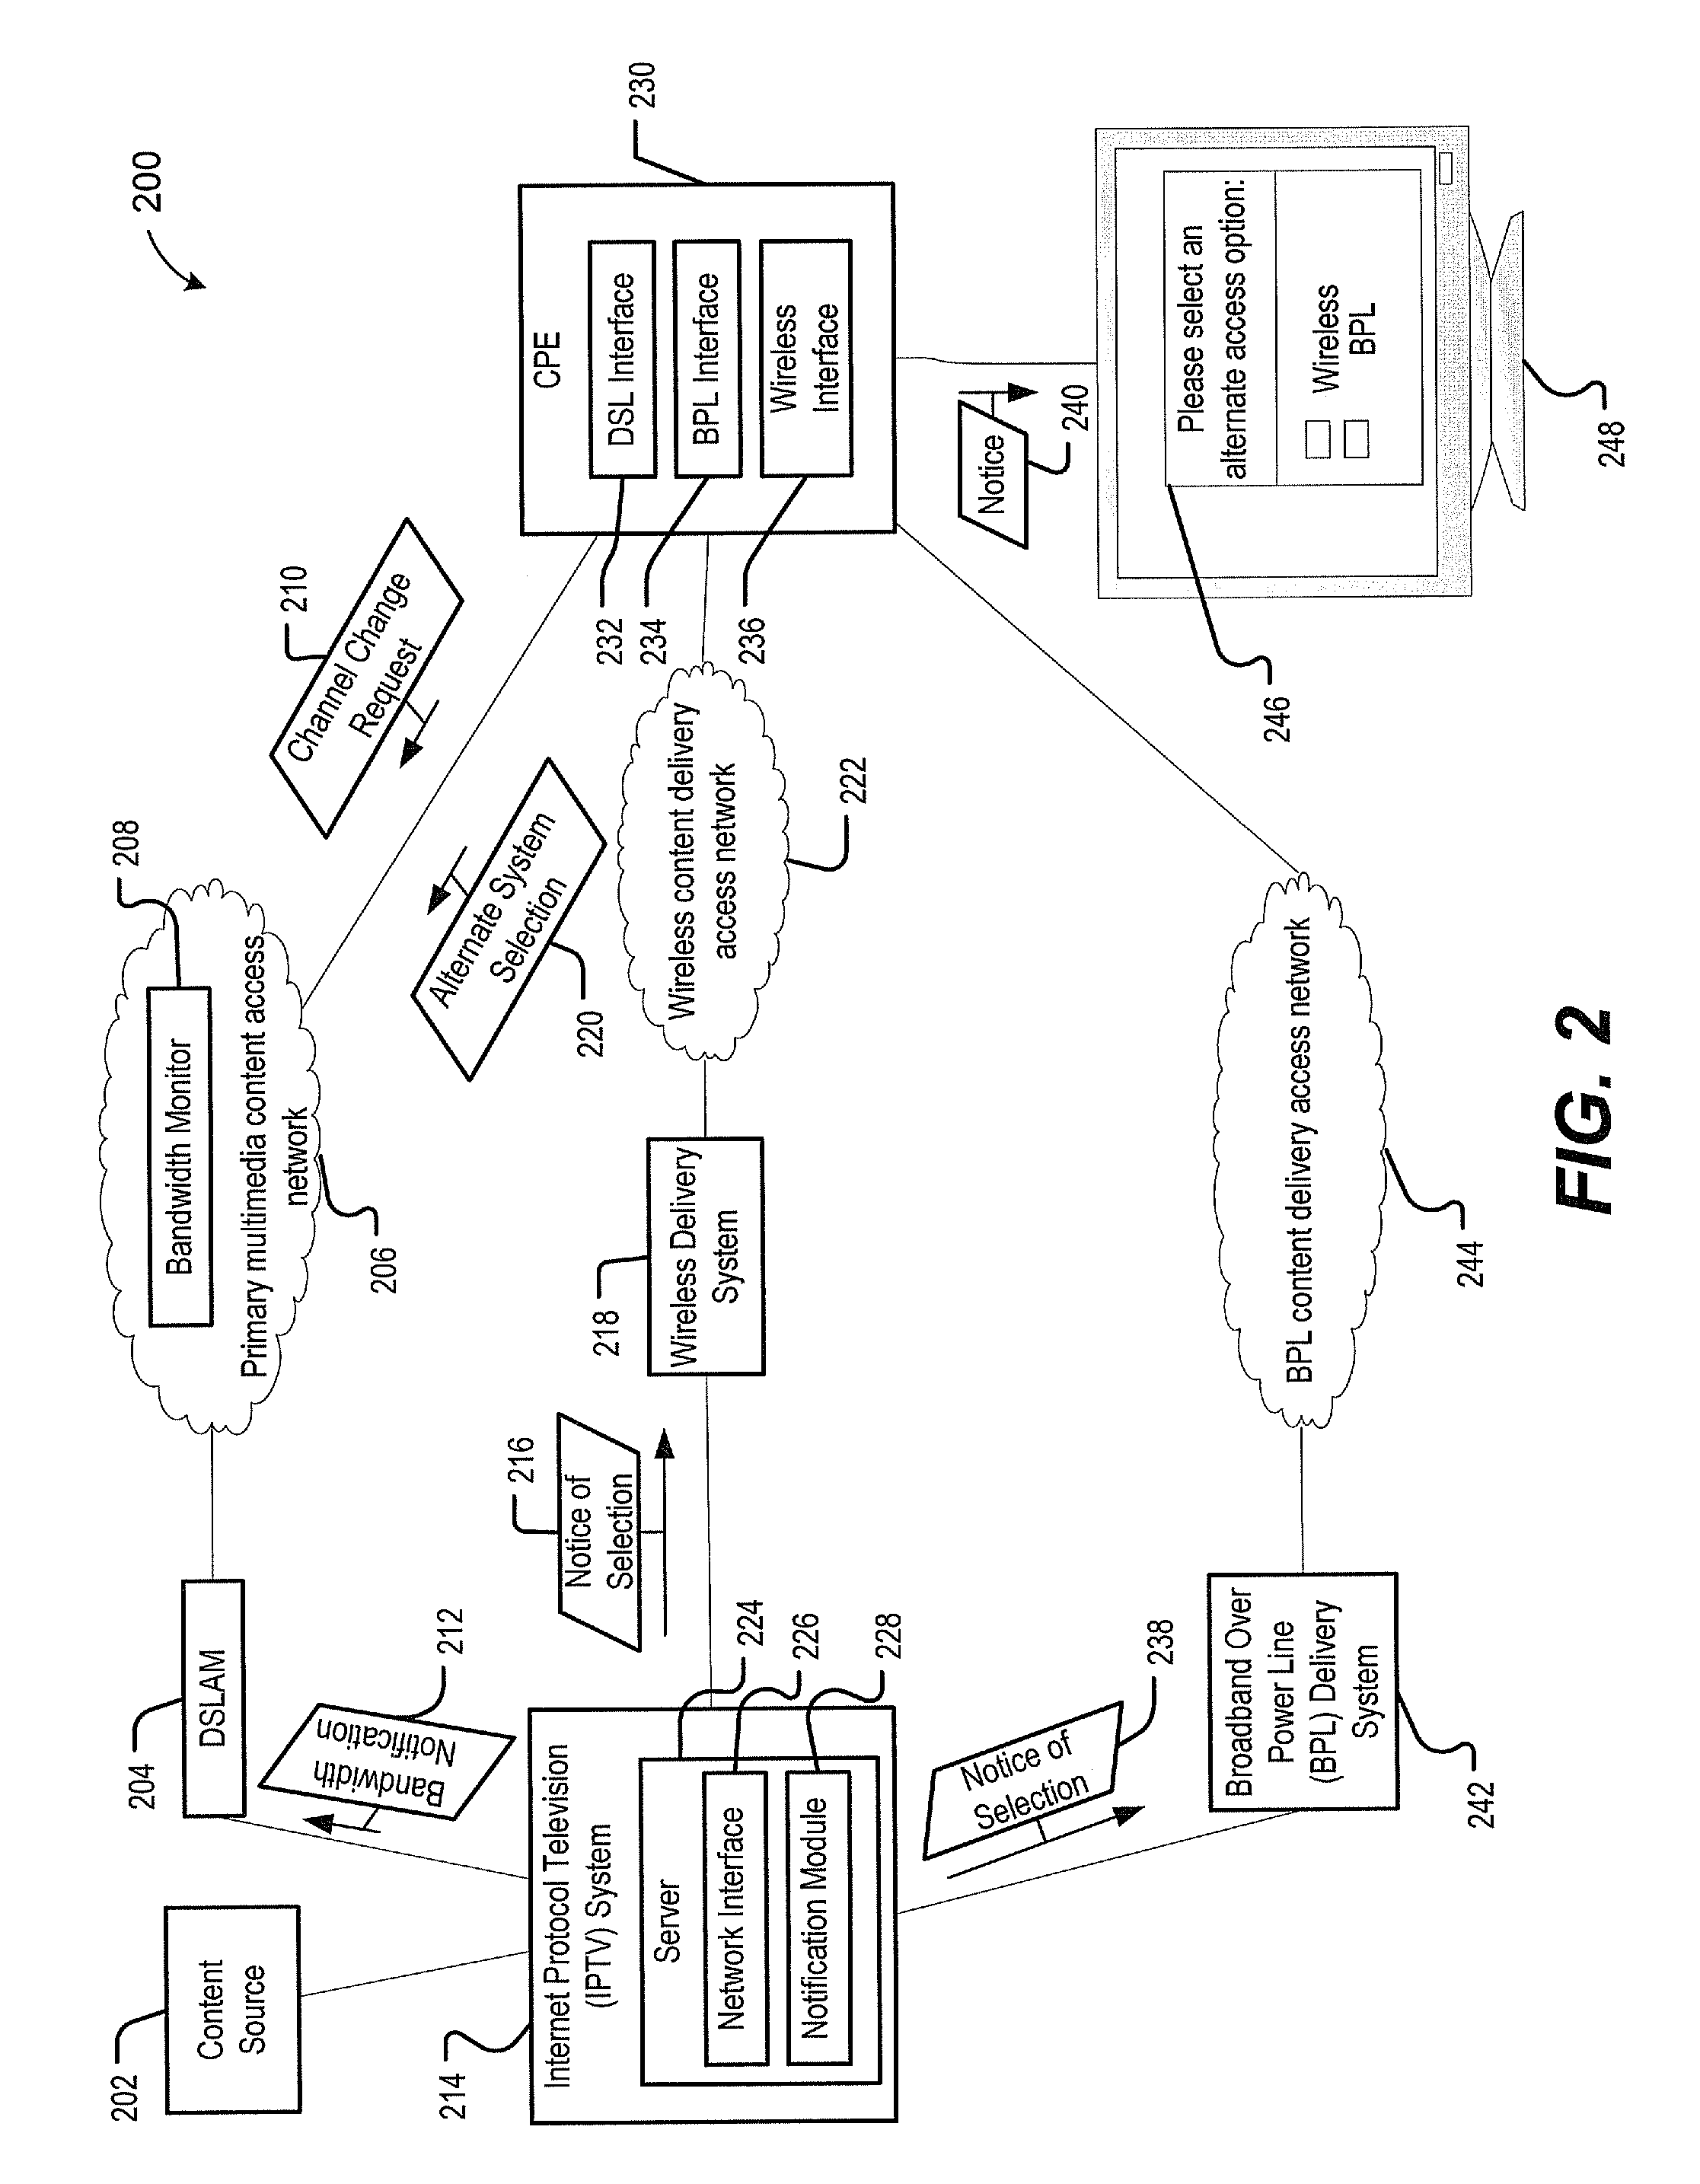 Channel Change Via An Alternate Multimedia Content Delivery System